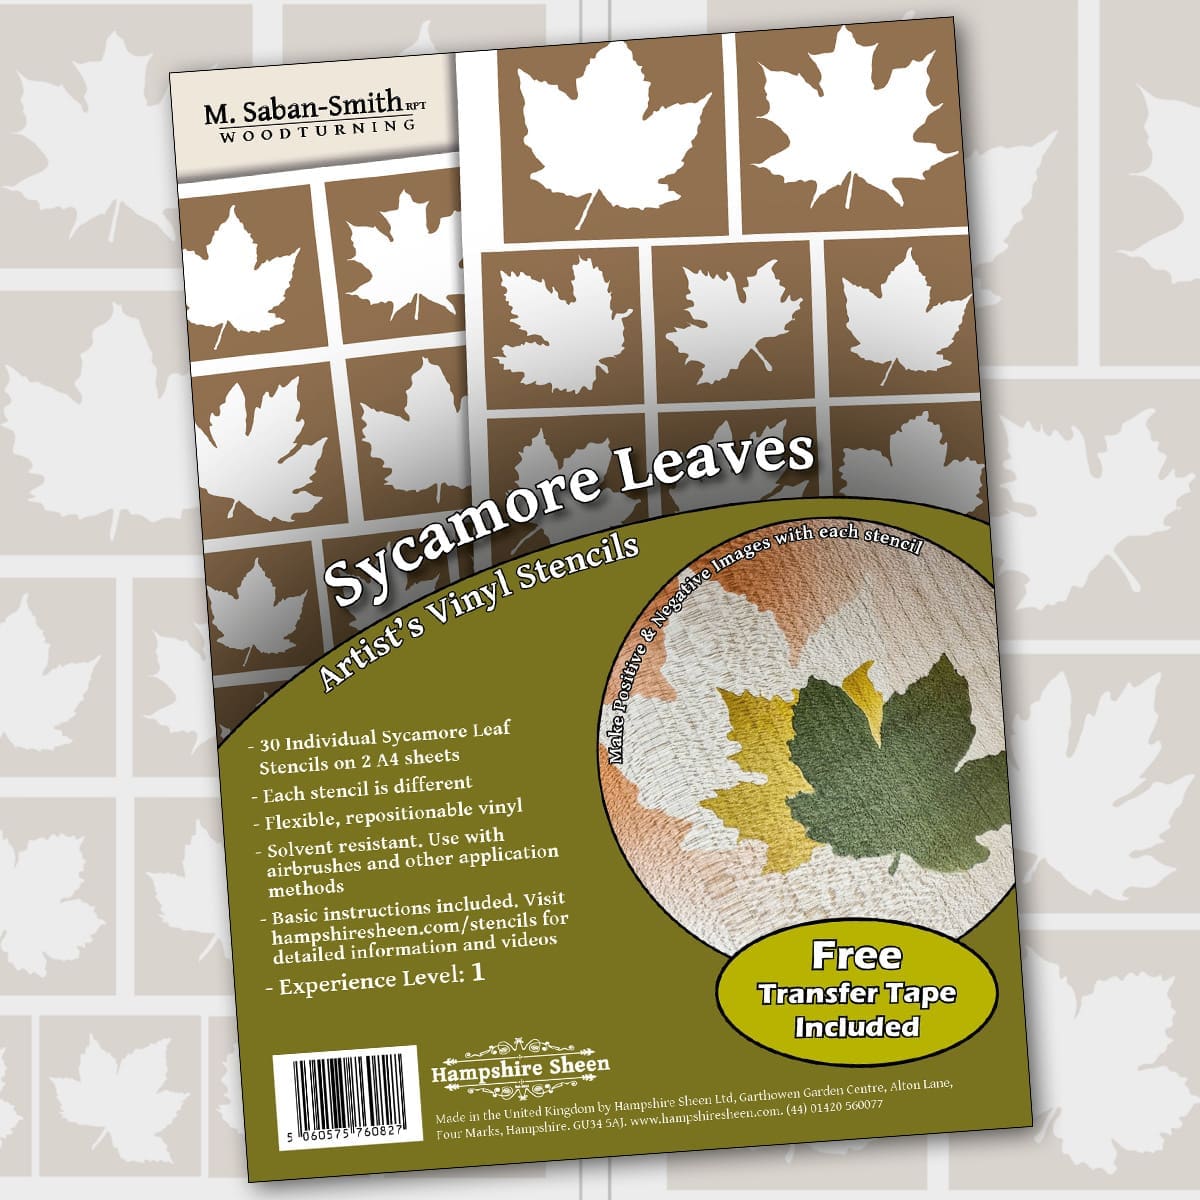 Sycamore Leaves Artists Stencils